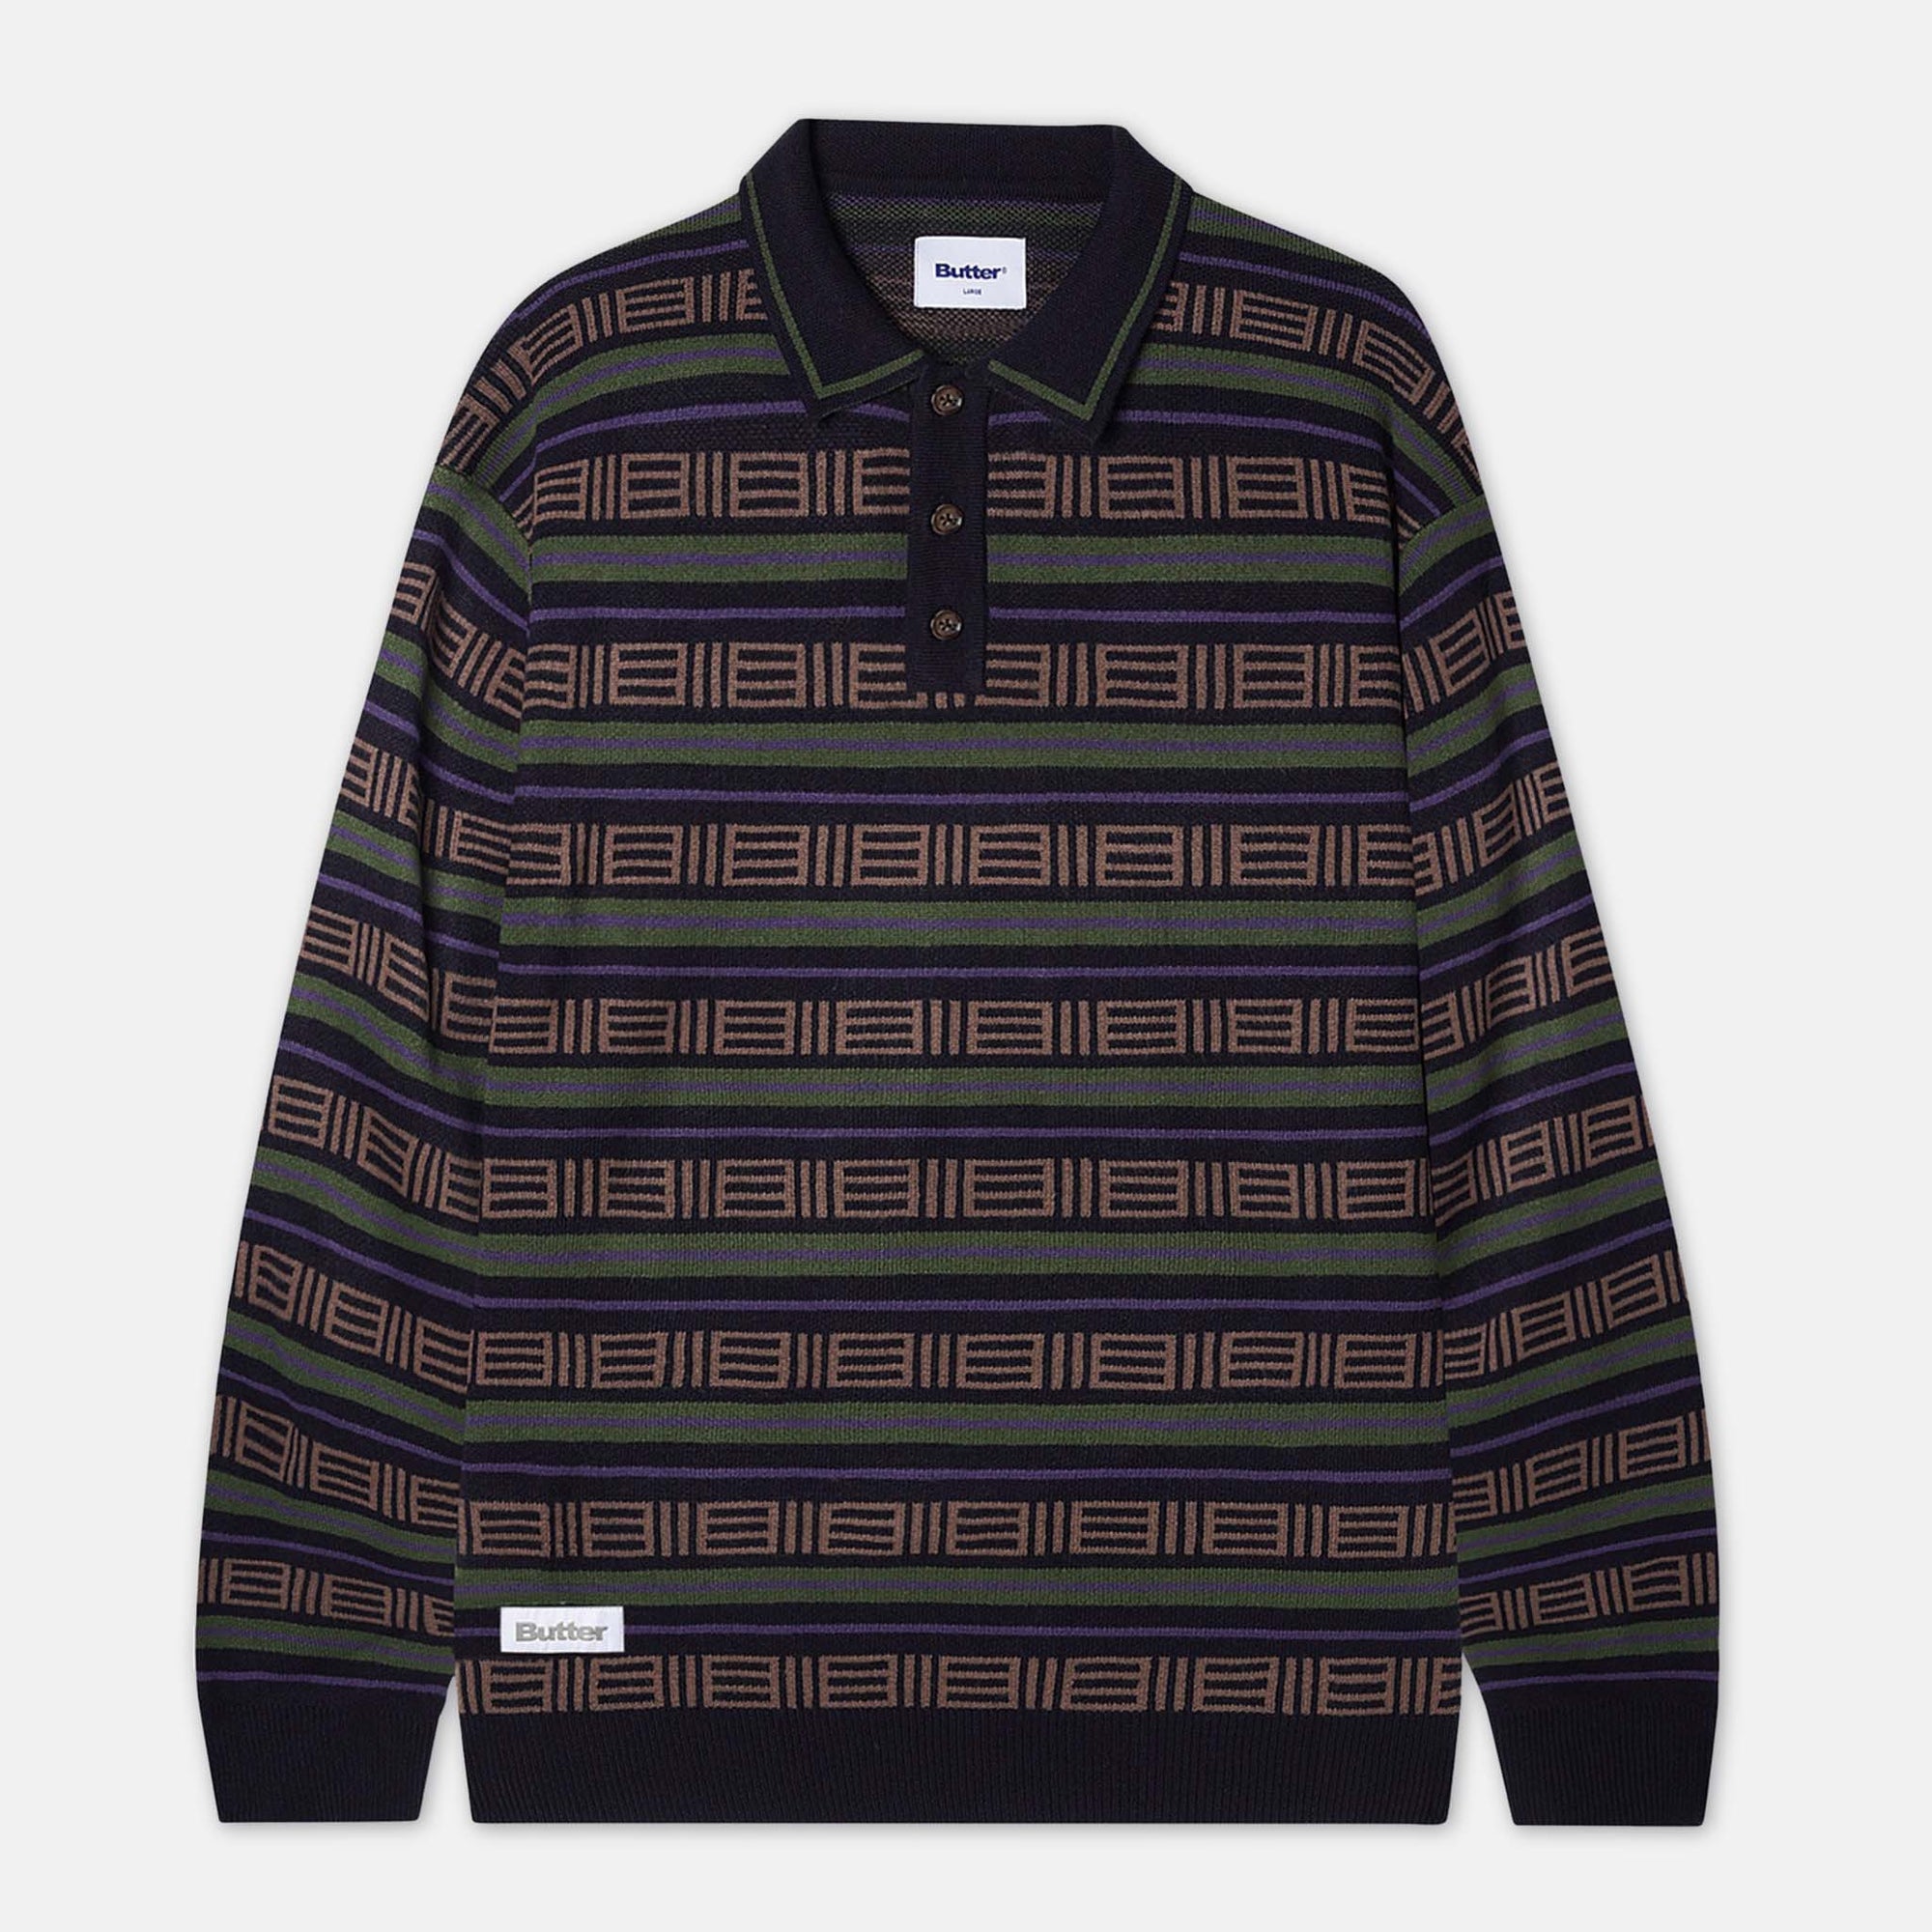 Butter Goods - Windsor Knitted Button Up Sweater - Navy / Forest